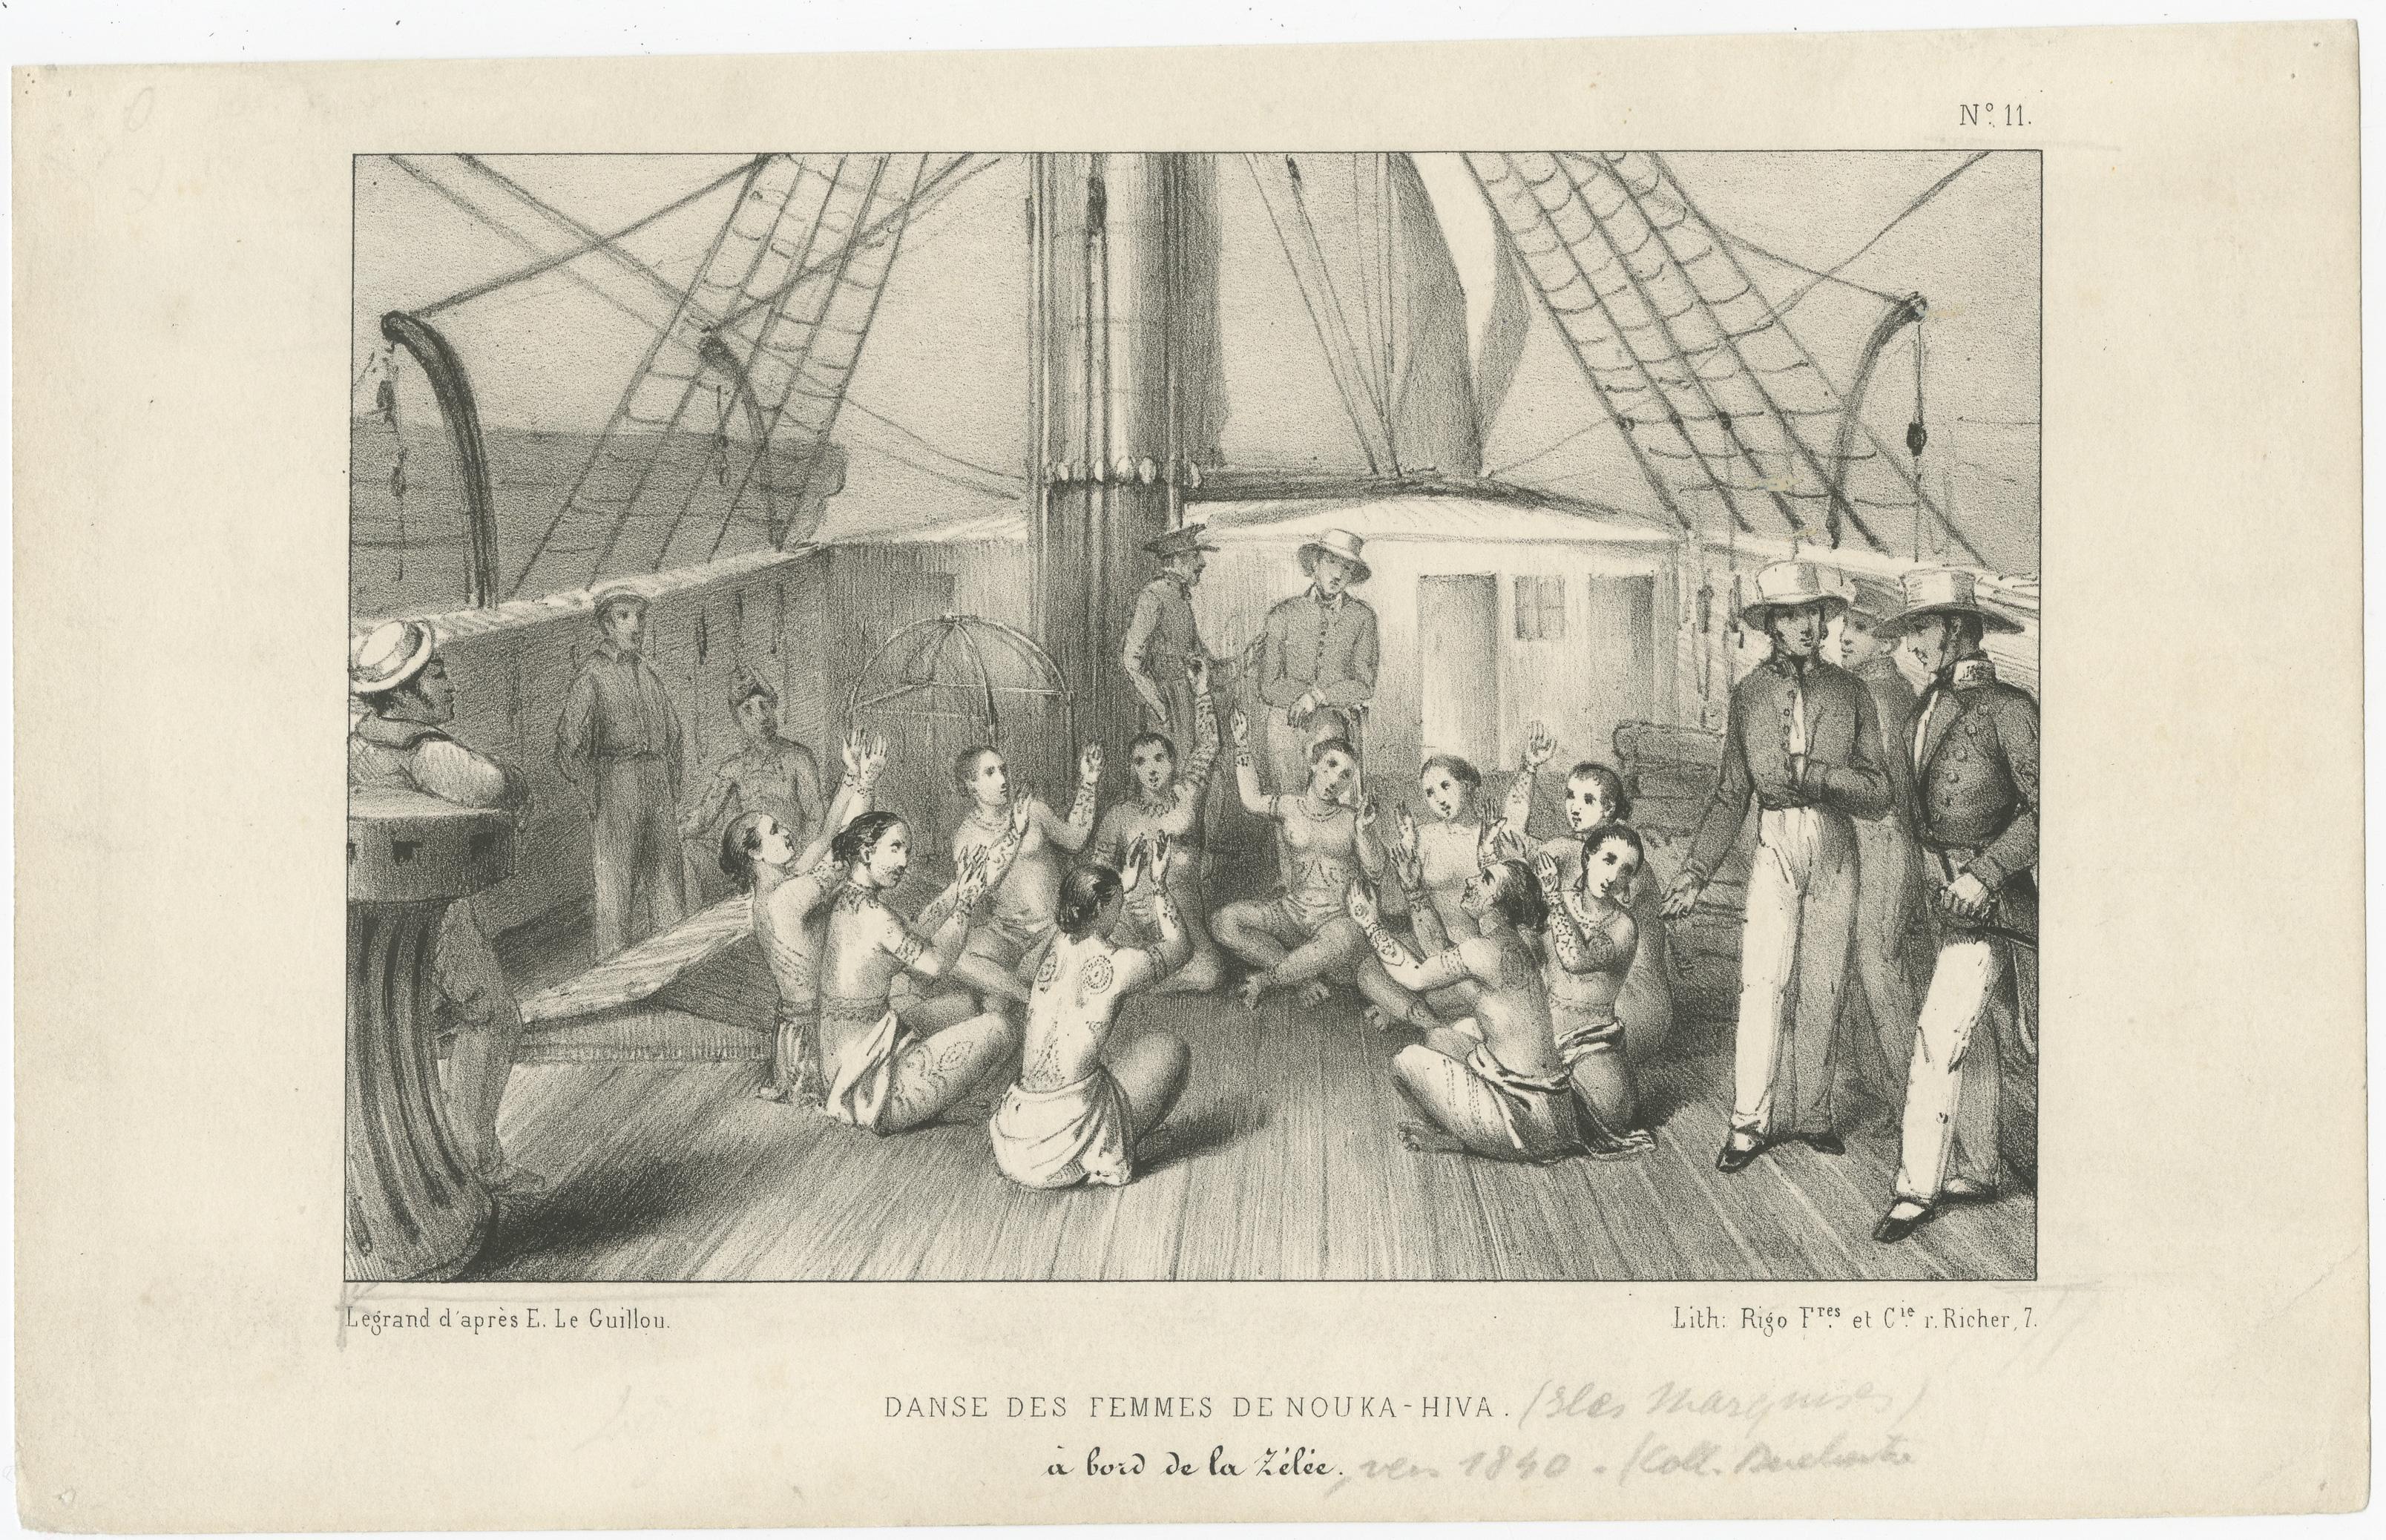 Antique print titled 'Danse des Femmes de Nouka-Hiva'. This print shows the dance of the women of Nuka Hiva aboard the Zelee. Nuku Hiva is the largest of the Marquesas Islands in French Polynesia. This print originates from Elie Le Guillou's 'Voyage